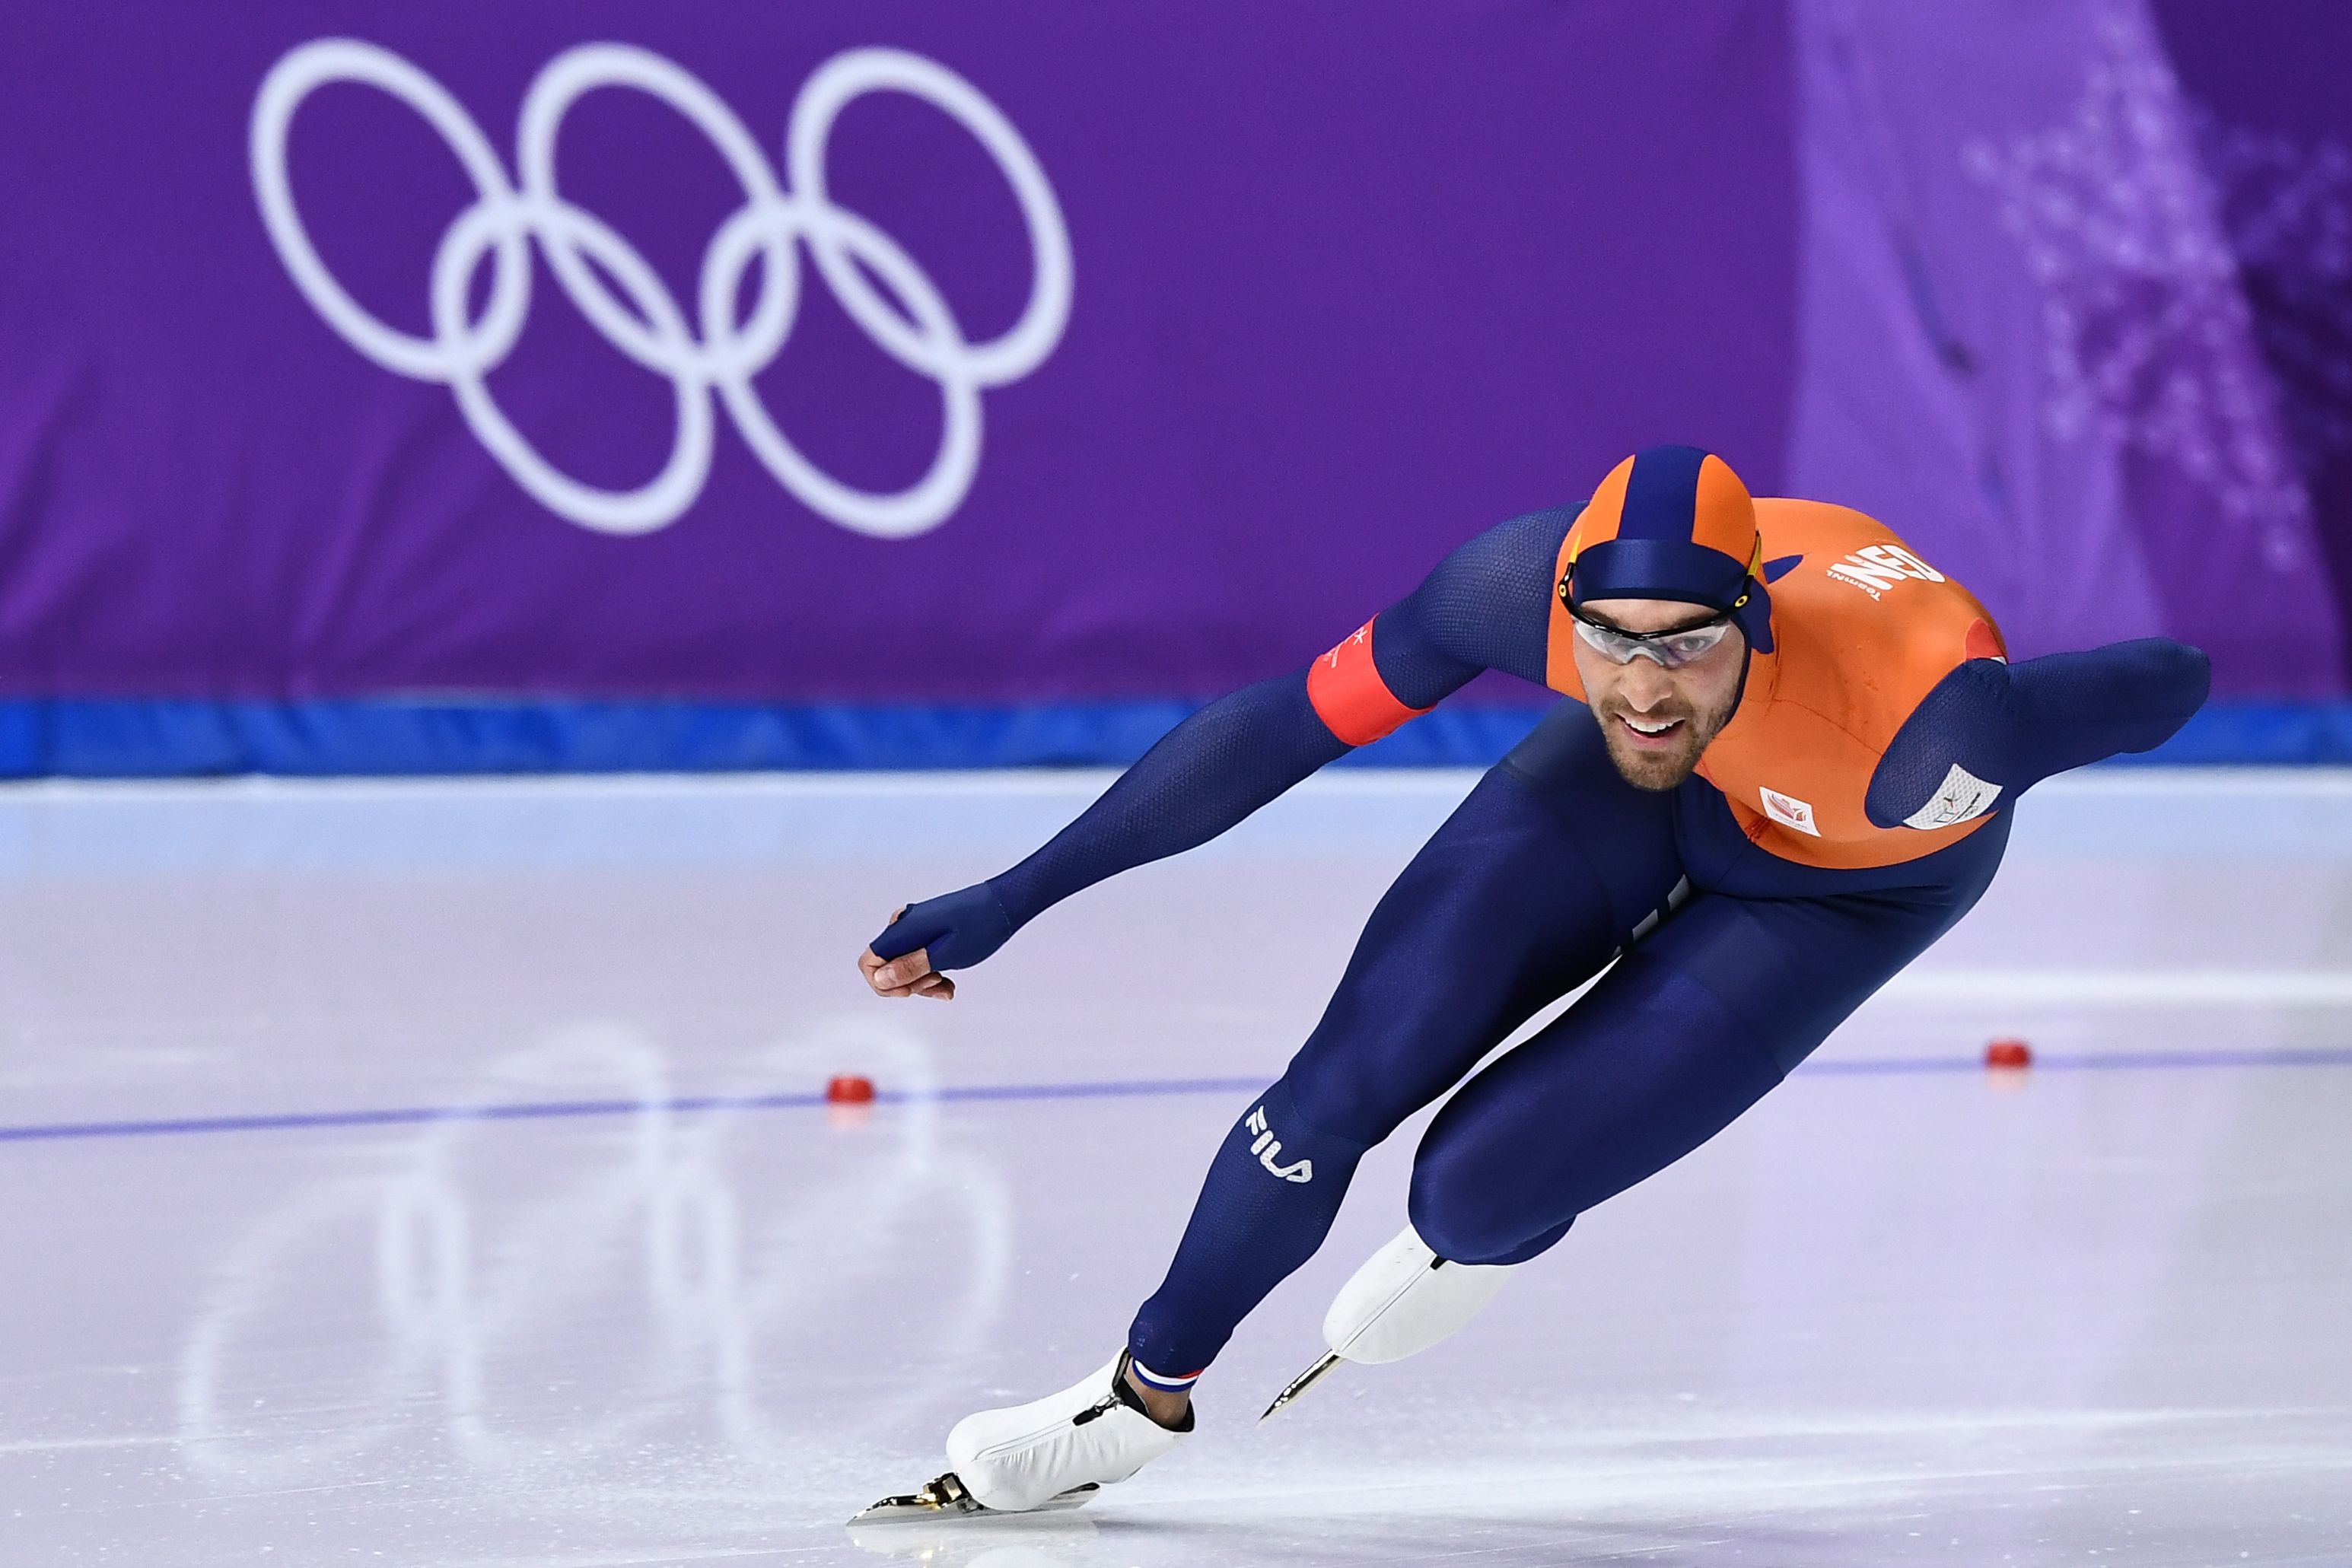 Woestijn Jumping jack Mis Why The Netherlands Dominates Winter Olympics Speed Skating | Time